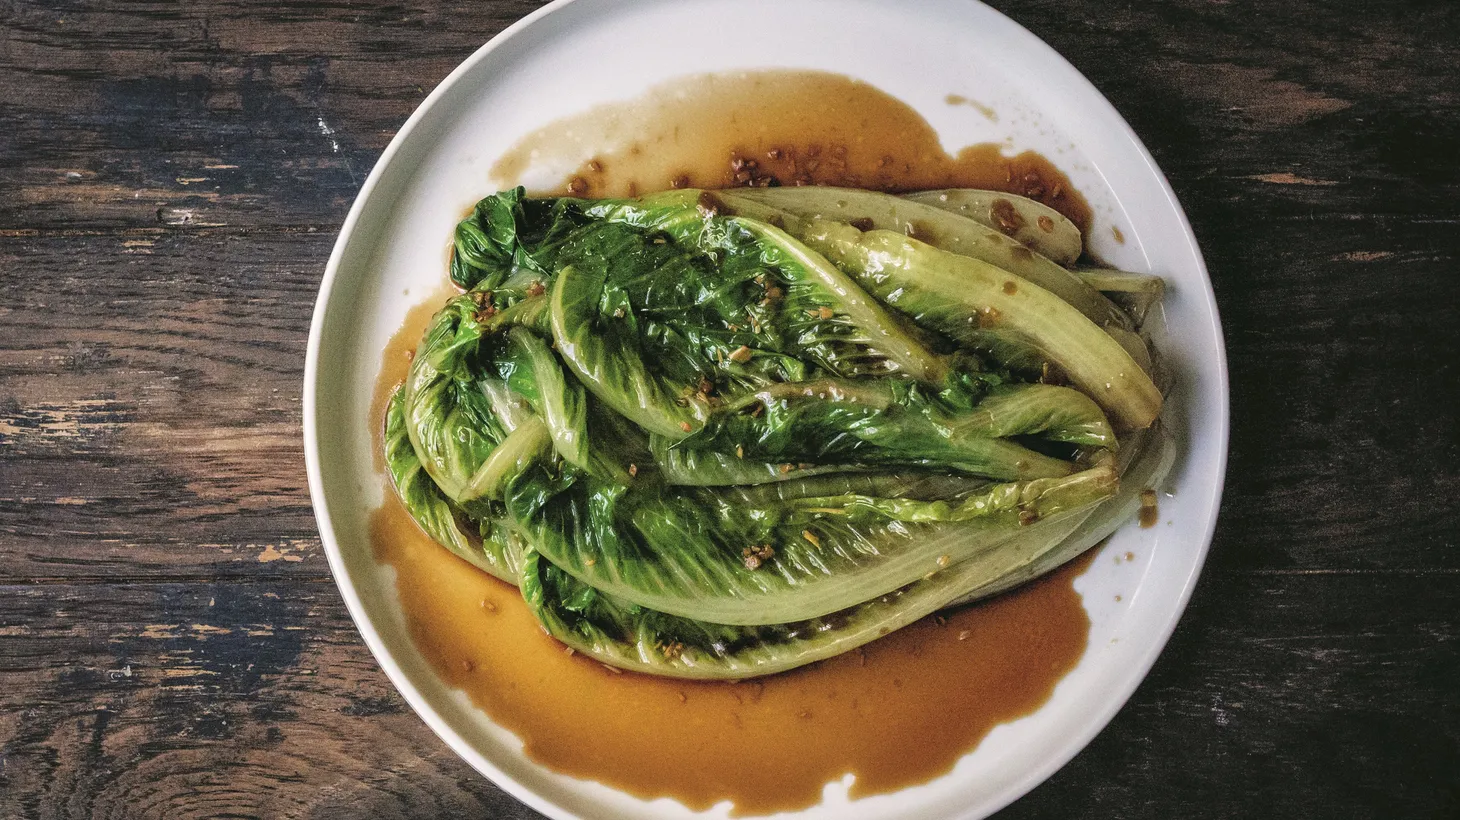 For Chinese cooks, romaine lettuce is just another leafy green, which has a savory sweetness when cooked.